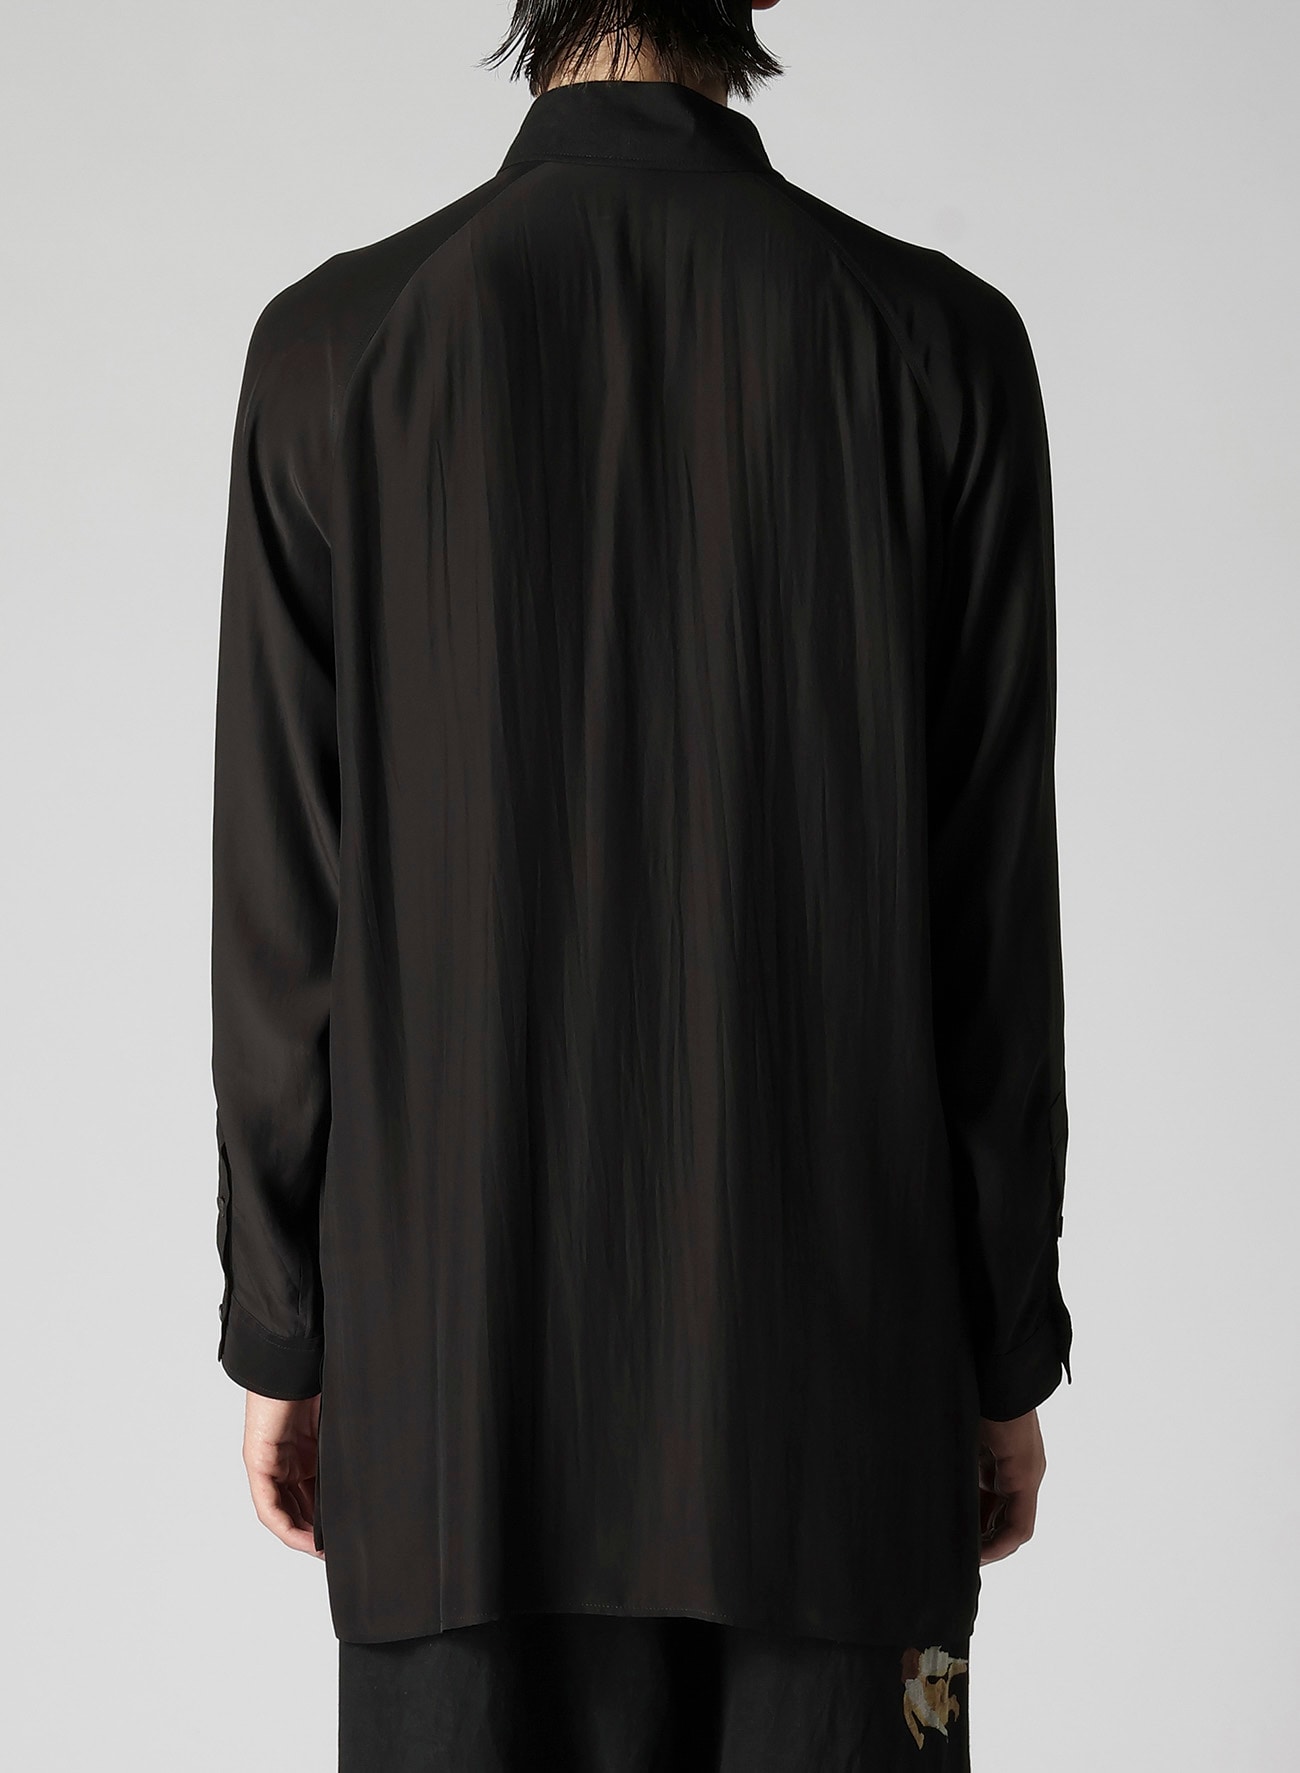 DOG AND ELDERLY PERSON SHIRT(S Black): Yohji Yamamoto POUR HOMME 